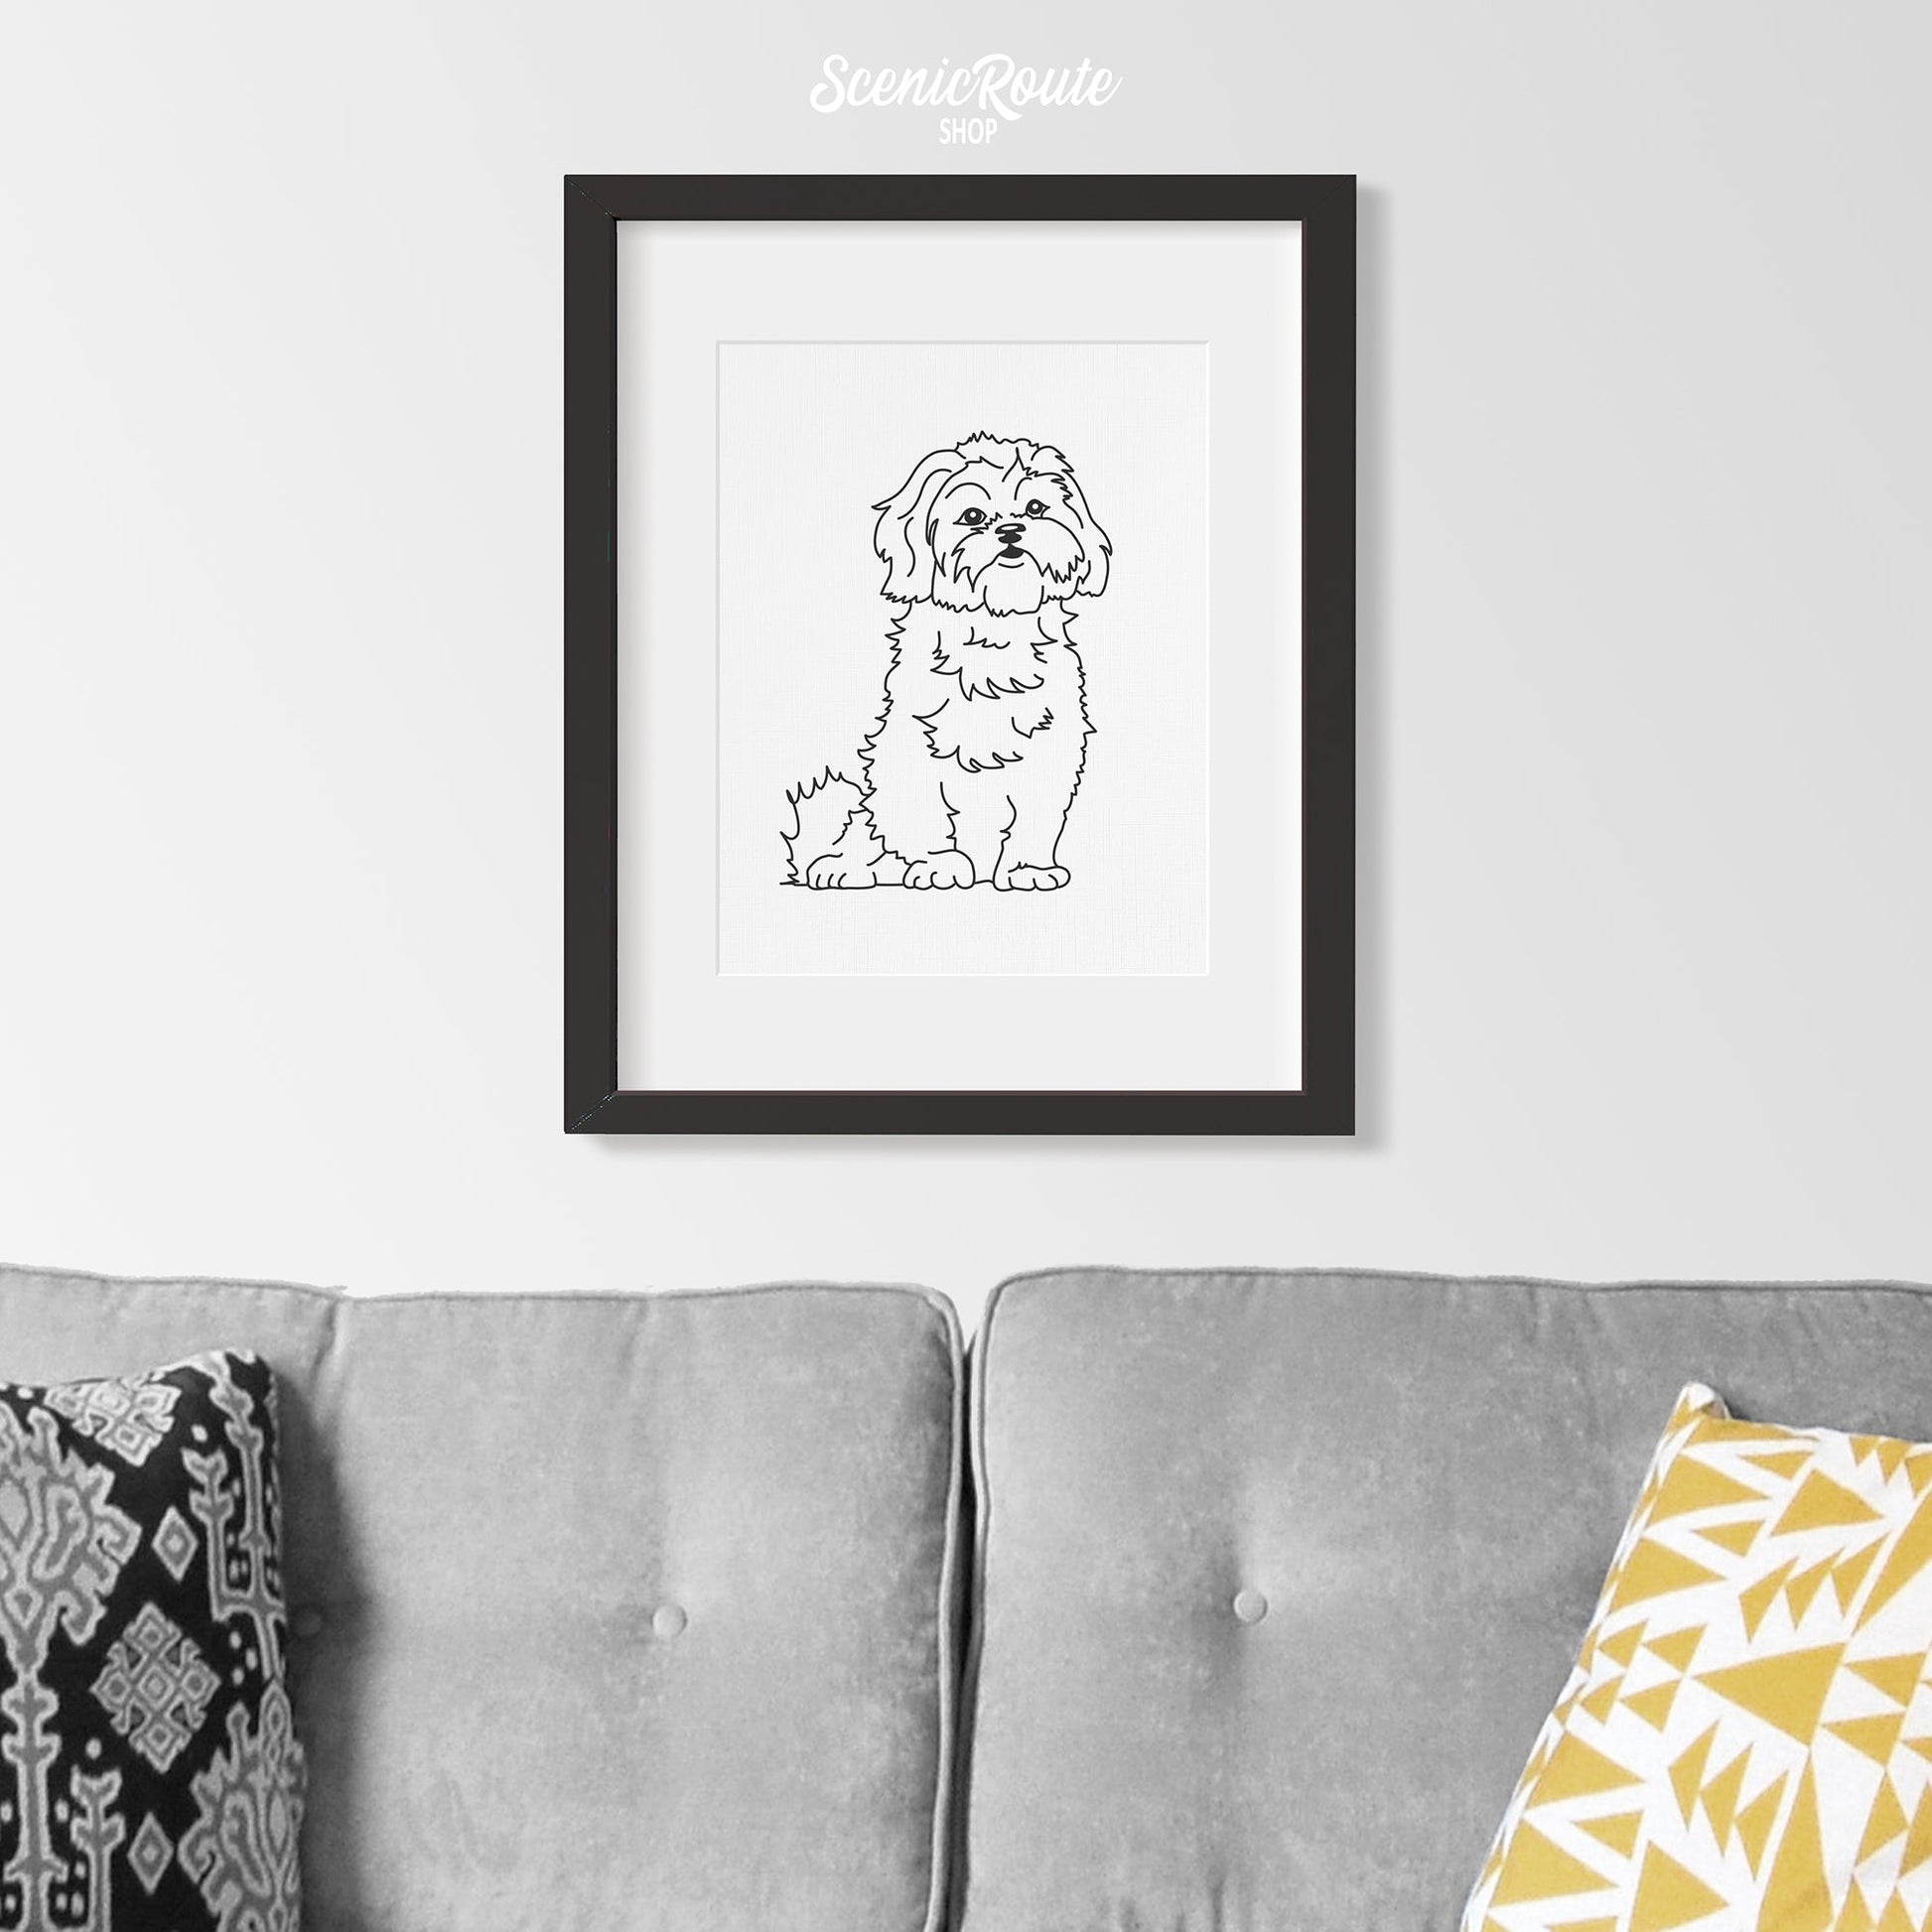 A framed line art drawing of a Shih Tzu dog hung above a couch